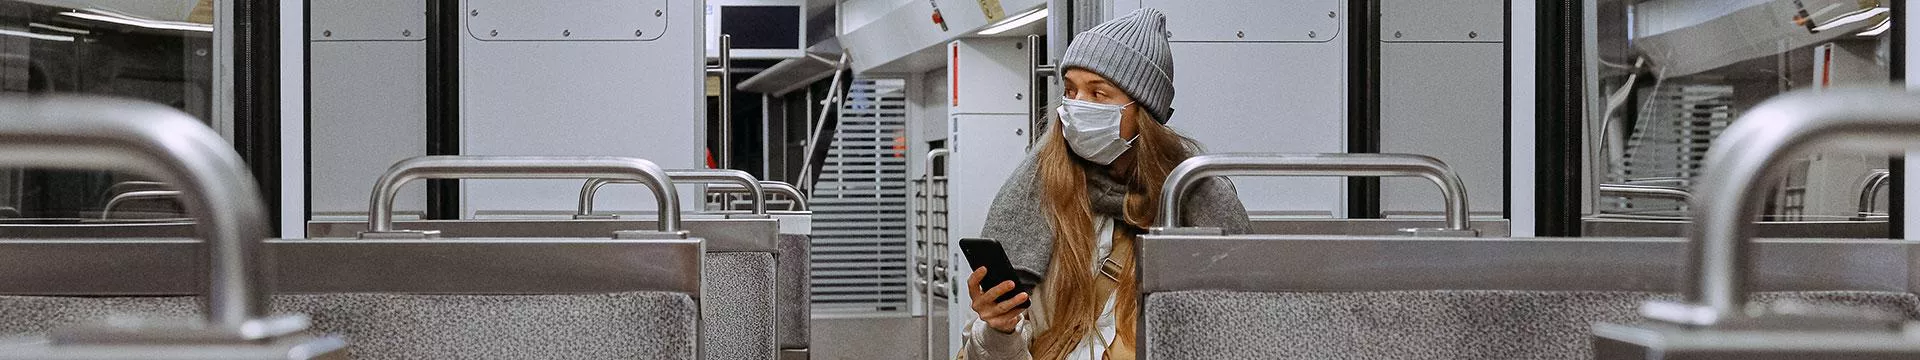 A woman sits alone on a train wearing a face mask